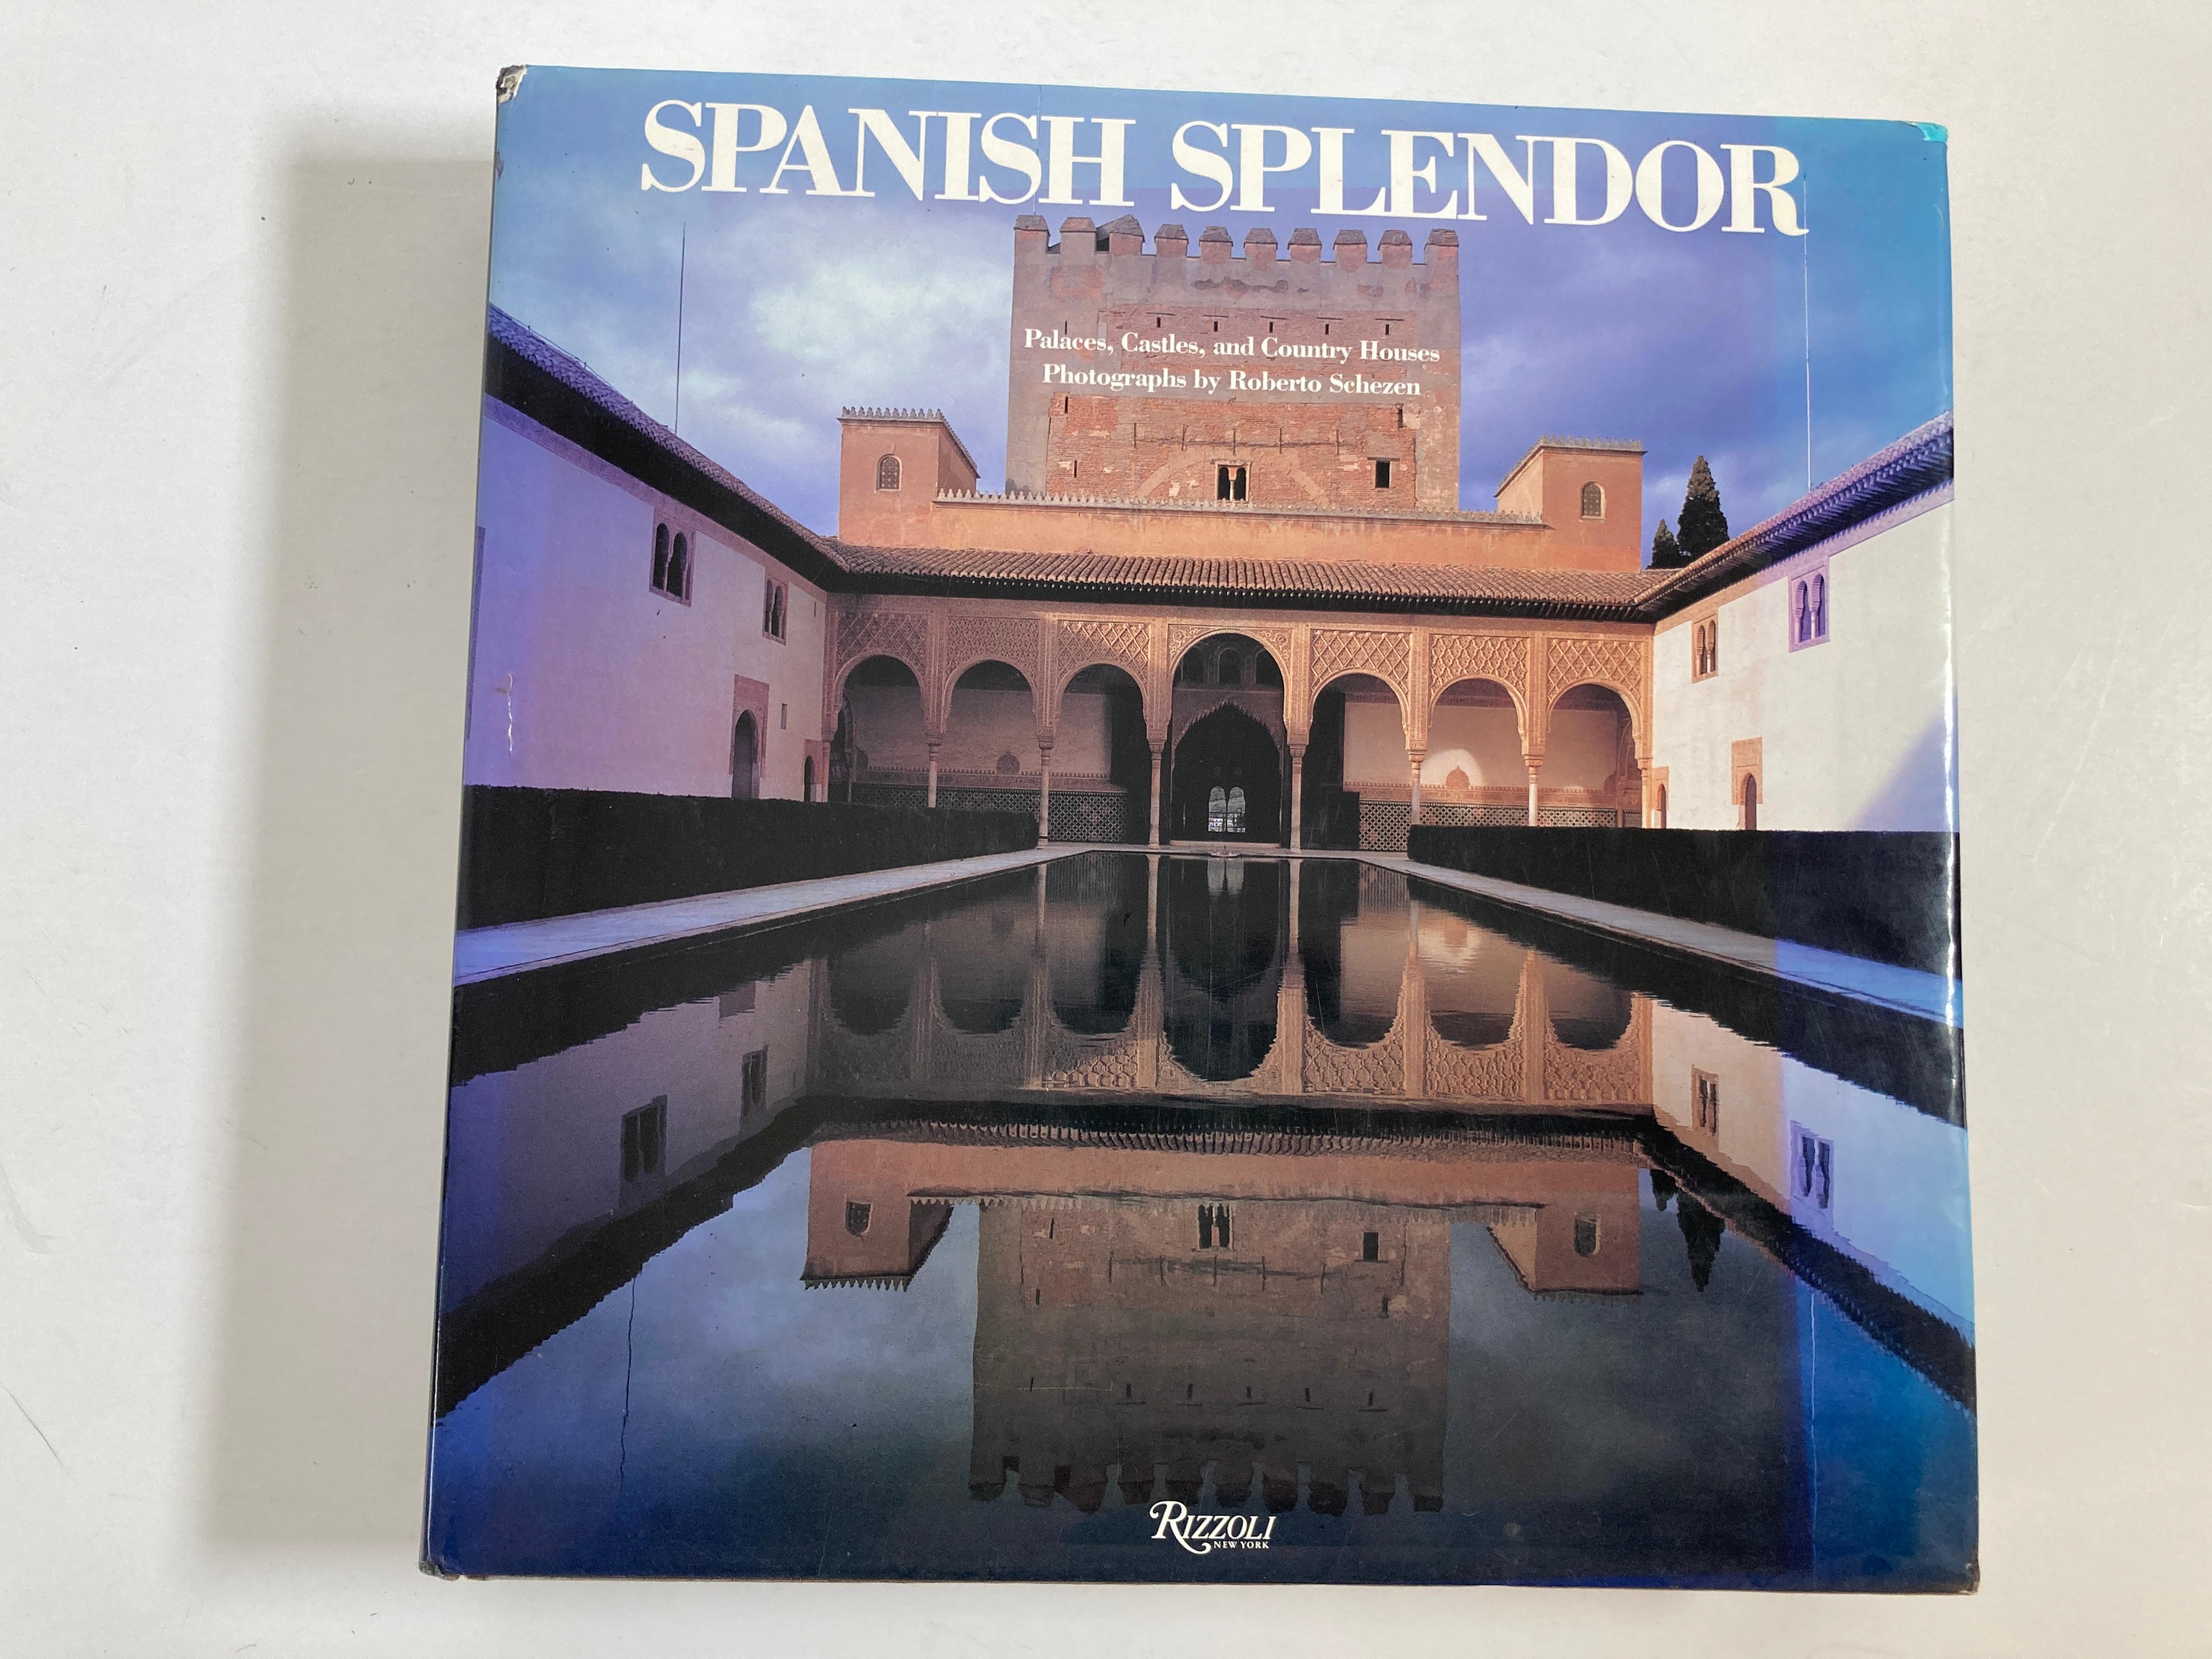 Spanish Splendor: Great Palaces, Castles, and Country Homes hardcover book.
y Mato, Juan Jose Junquera (text by); Schezen, Roberto (photographs by); y Morenes, Enrique Ruspoli (introduction).
From Aragon, Galicia, and the Basque regions in the north